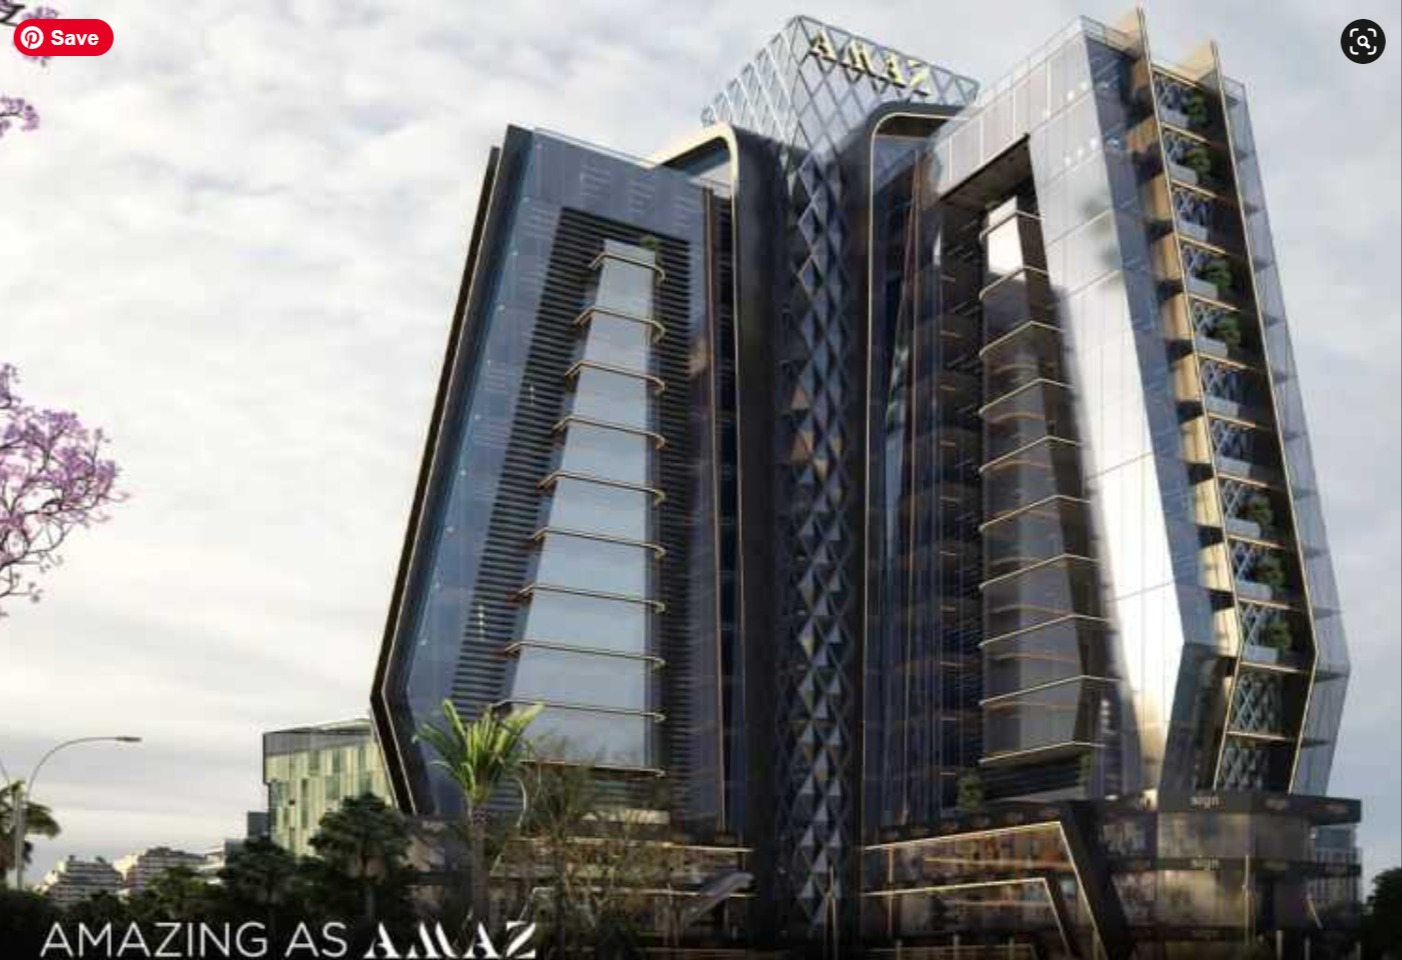 With an area of 47 m² shops for sale in Amaz Business Complex Mall